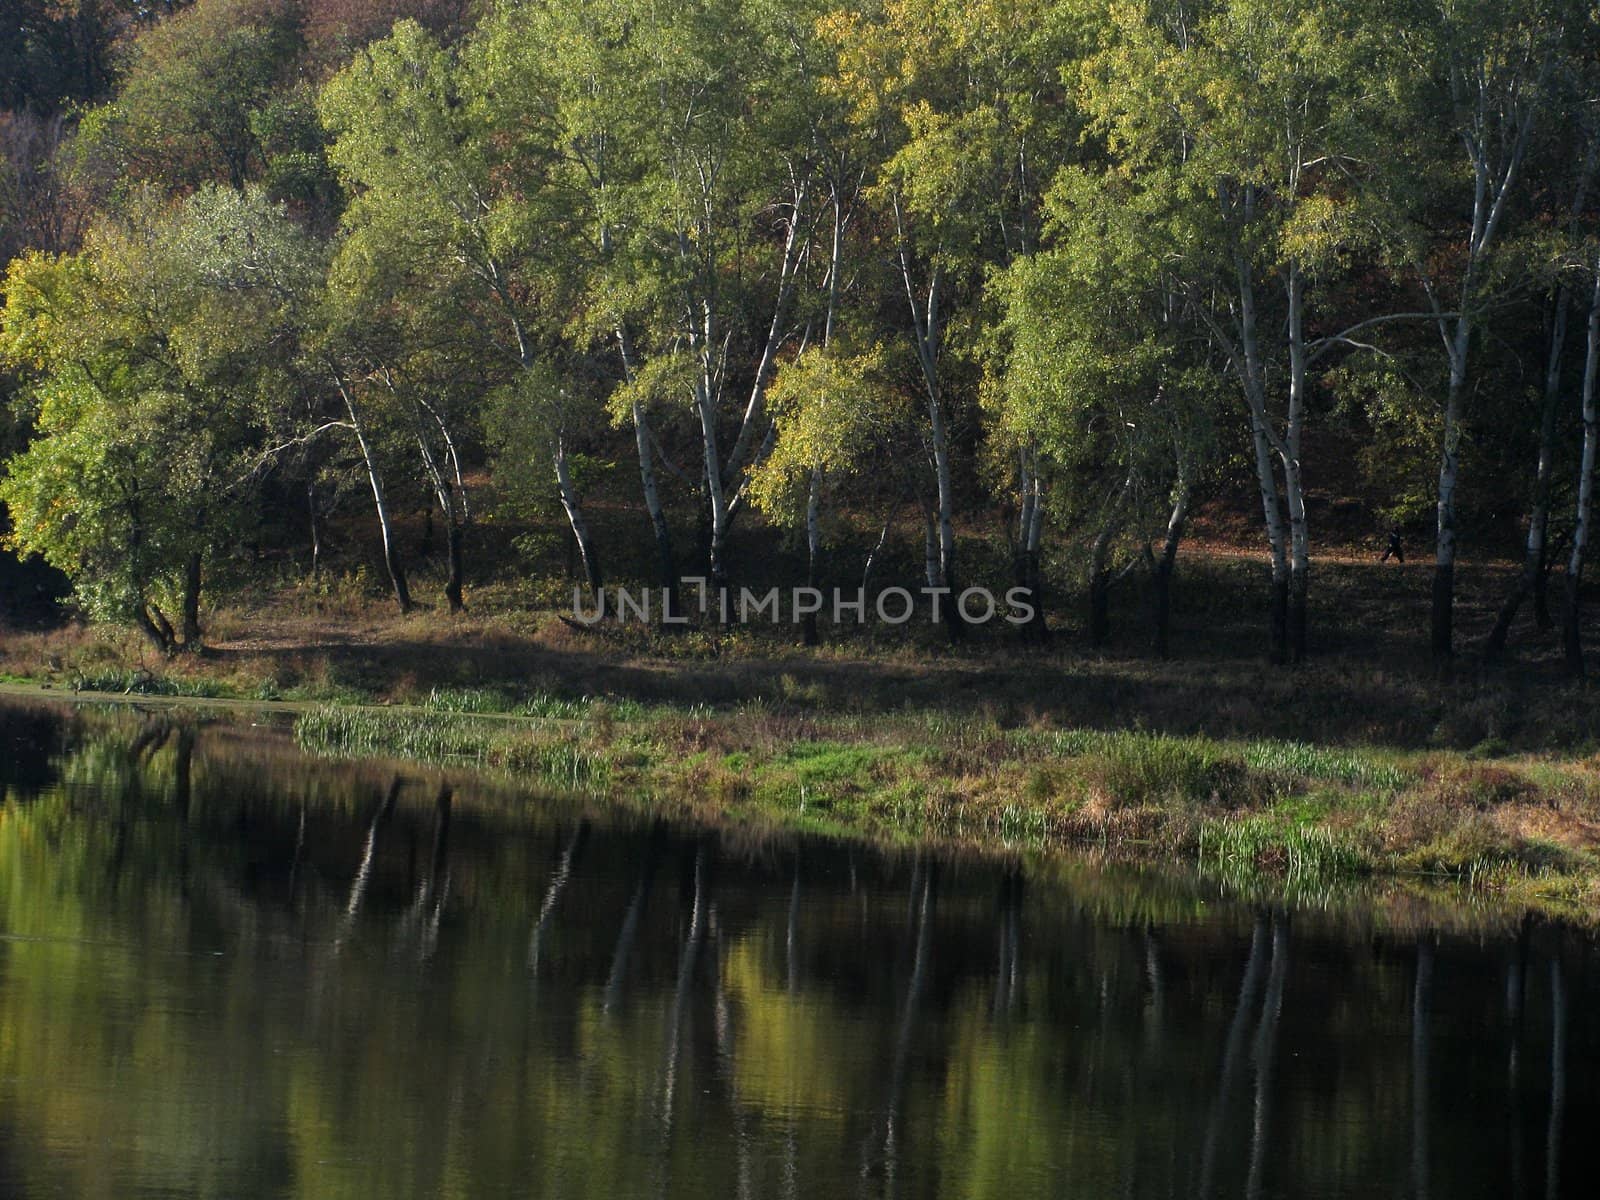 reflection of trees in river at fall